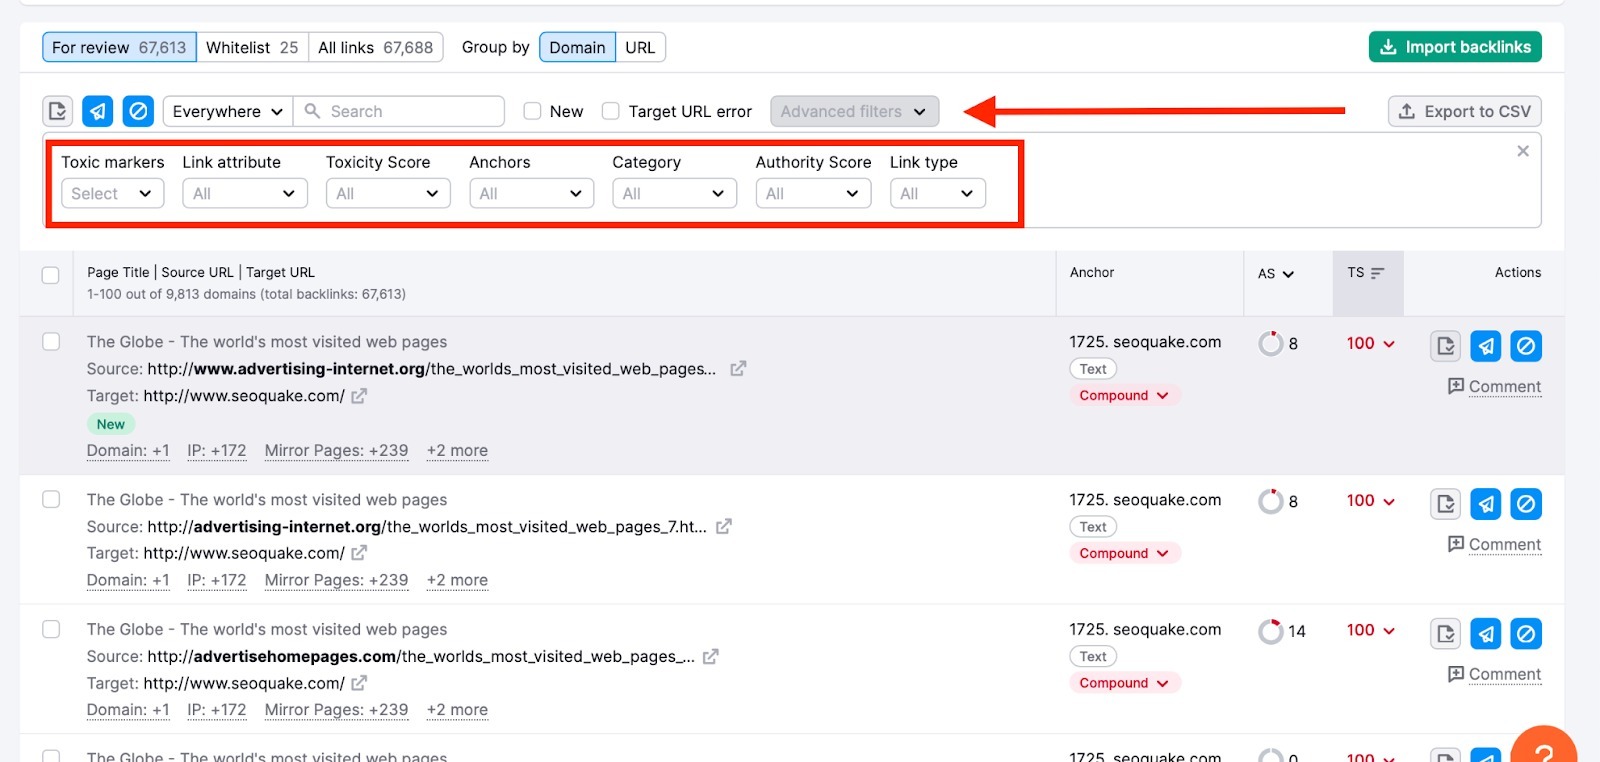 An example of what the list of Advanced filters looks like in Backlink Audit. A red arrow is pointing towards the Advanced filters dropdown menu, and the entire row of available advanced filters is highlighted separately.